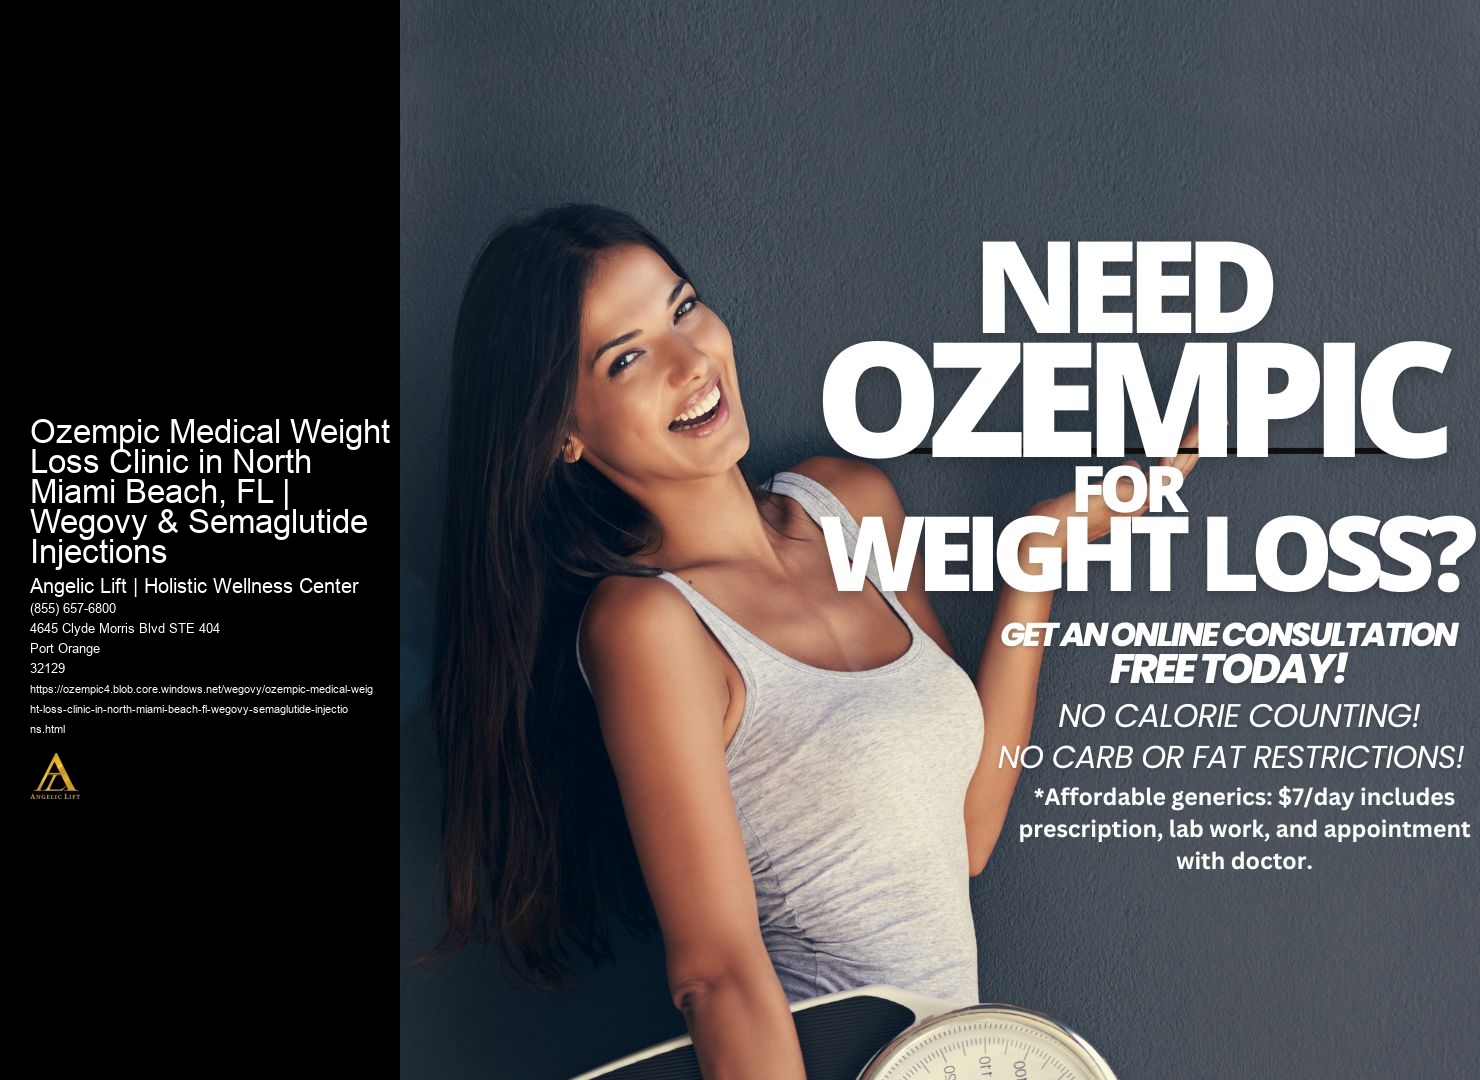 Ozempic Medical Weight Loss Clinic in North Miami Beach, FL | Wegovy & Semaglutide Injections